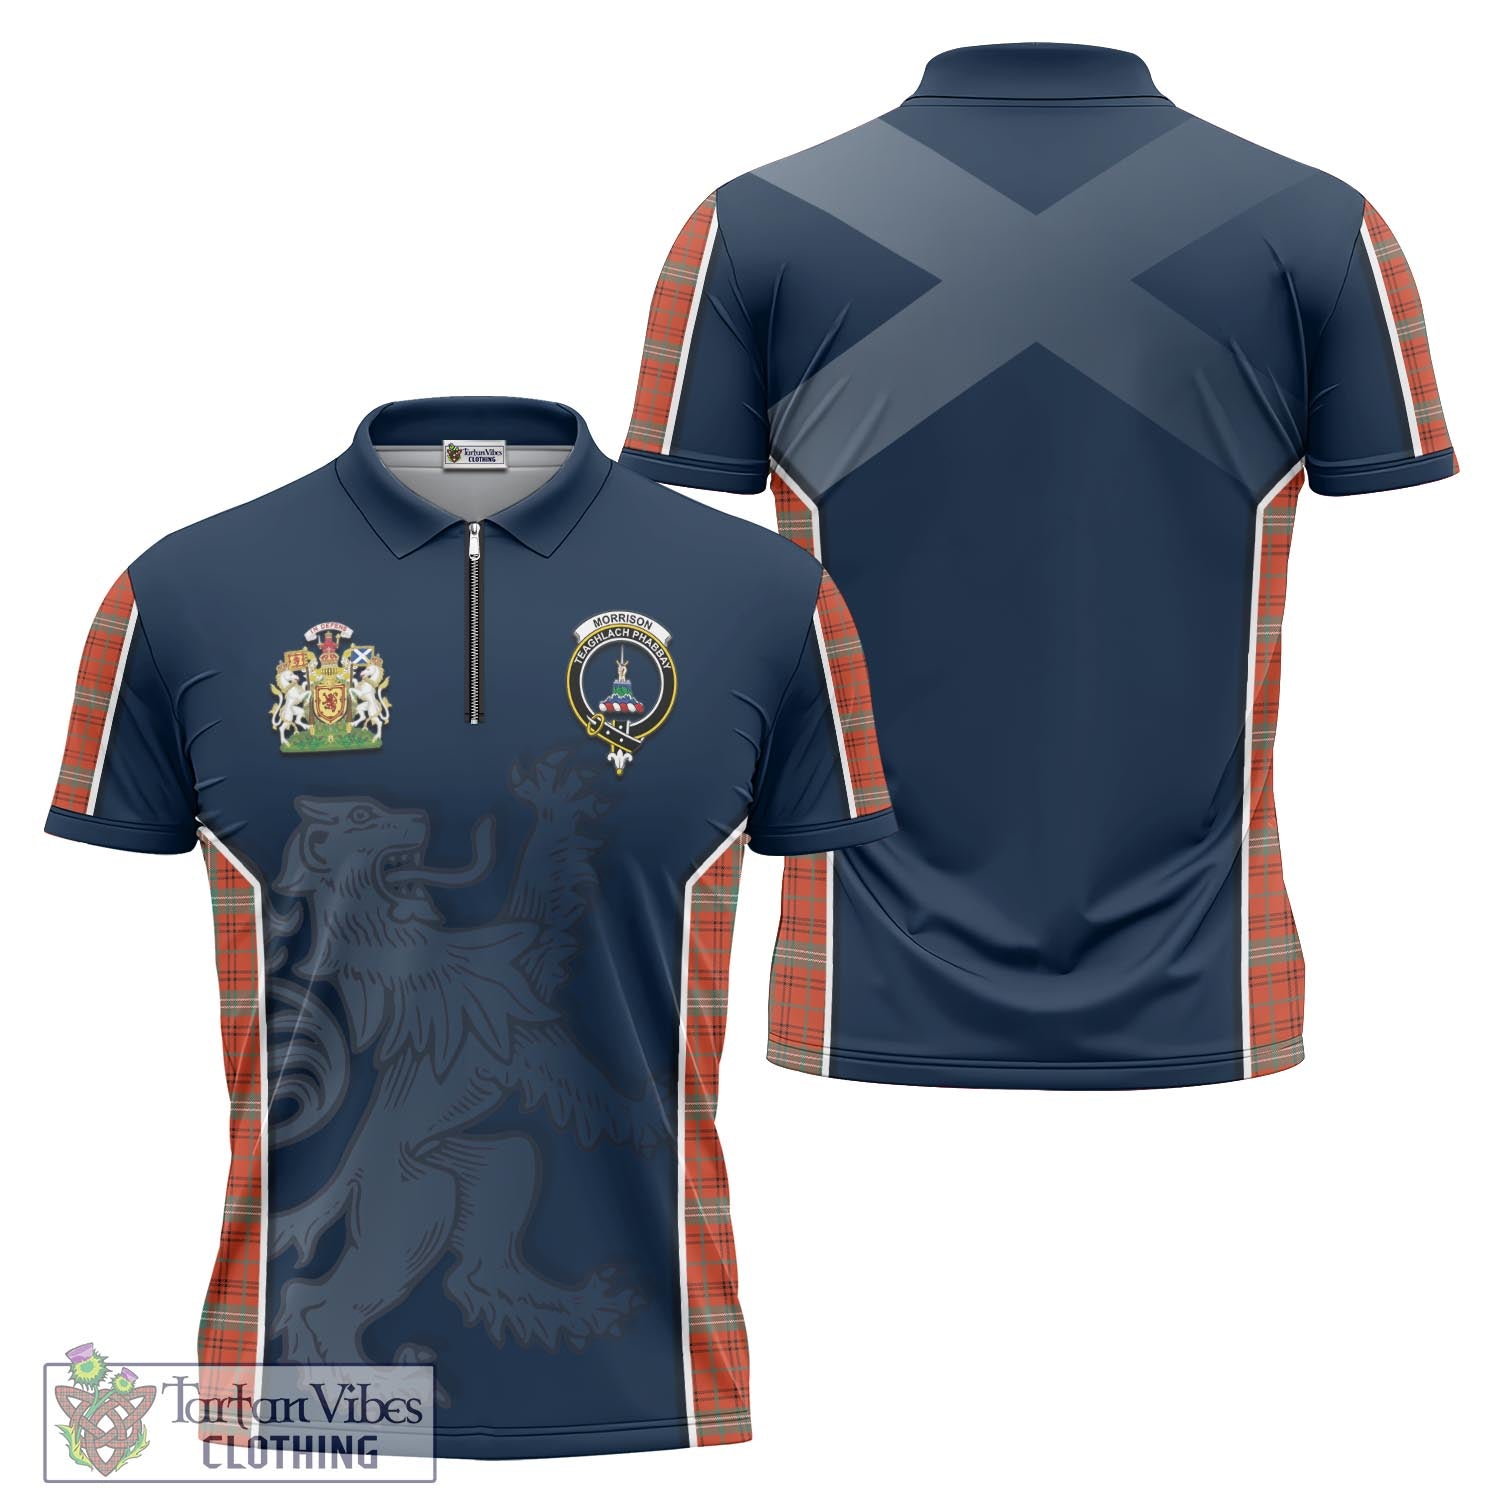 Tartan Vibes Clothing Morrison Red Ancient Tartan Zipper Polo Shirt with Family Crest and Lion Rampant Vibes Sport Style